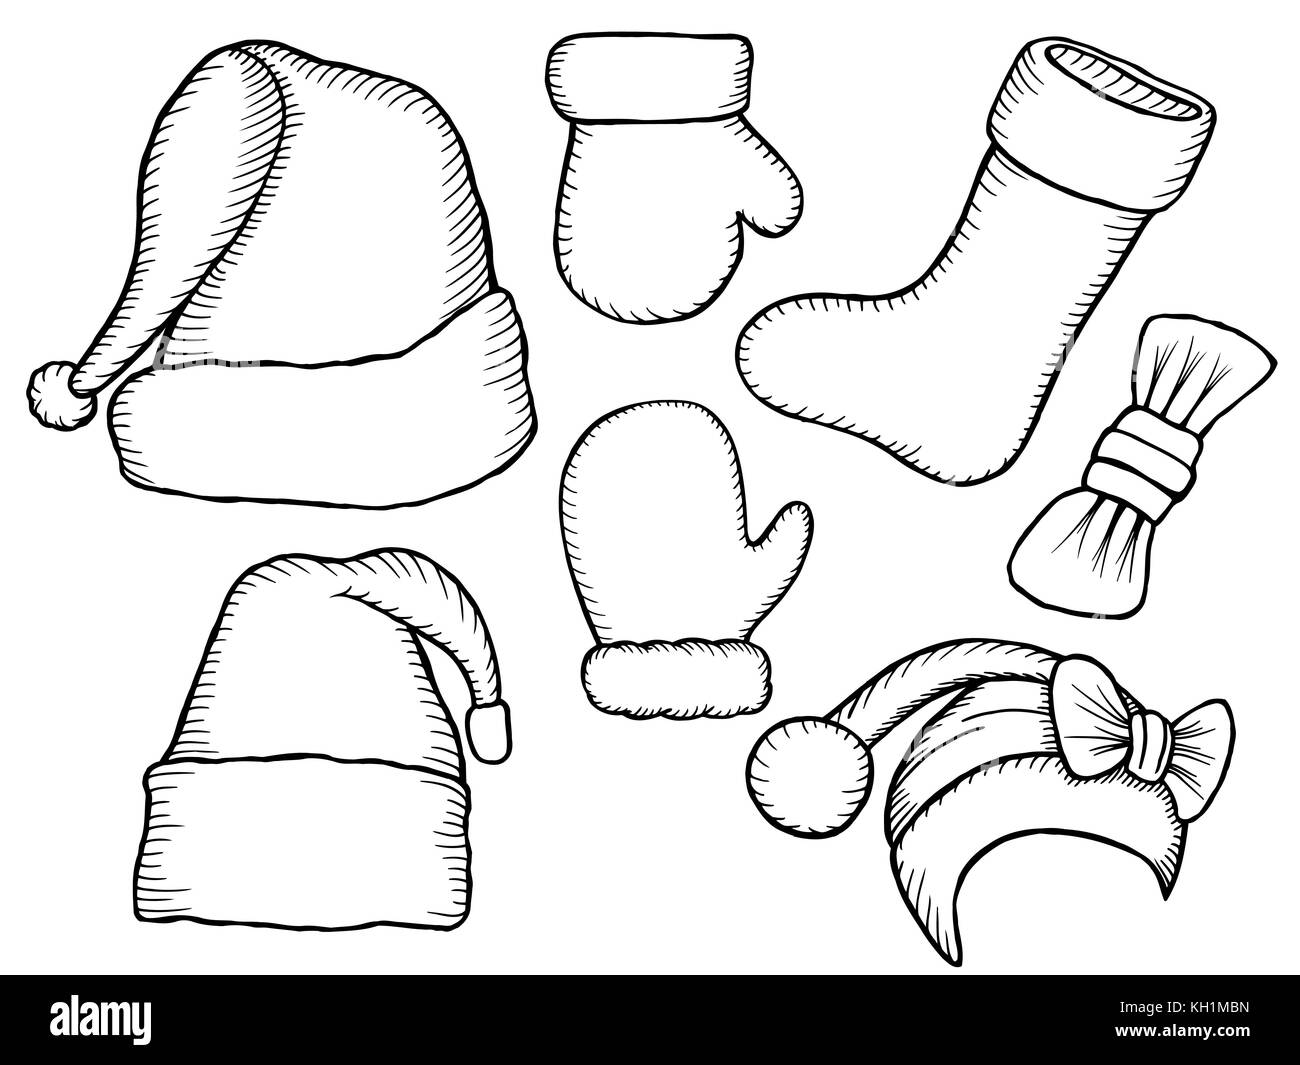 Set of monochrome doodle hats boots socks santa claus template christmas hat for design decorating cards and collages stock vector image art